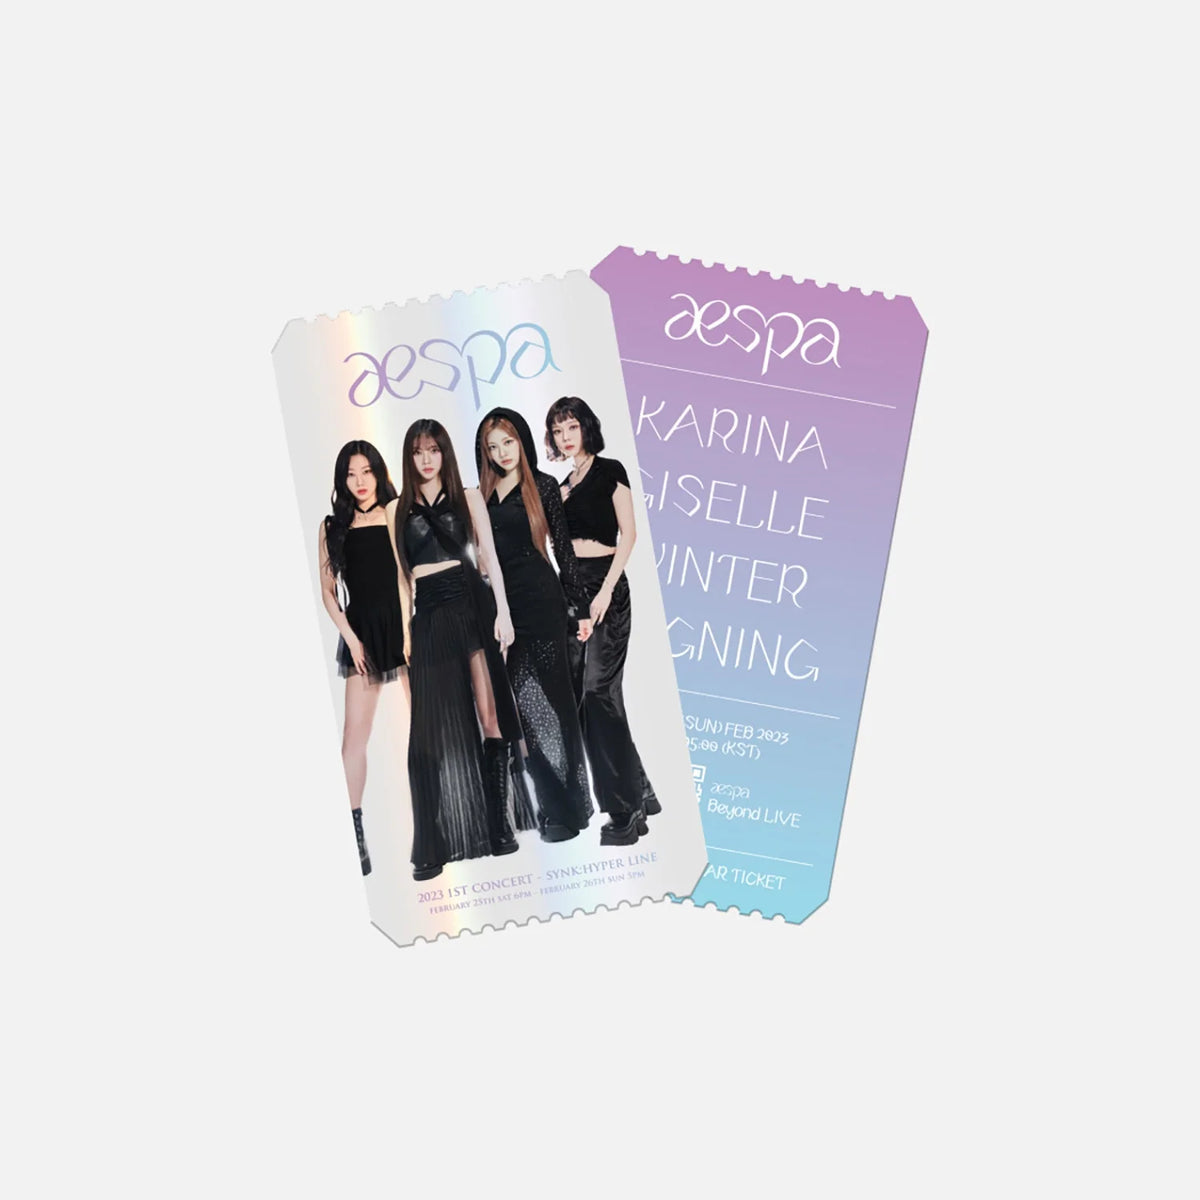 aespa 2023 1st concert synk : hyper line md - 01. special ar ticket set